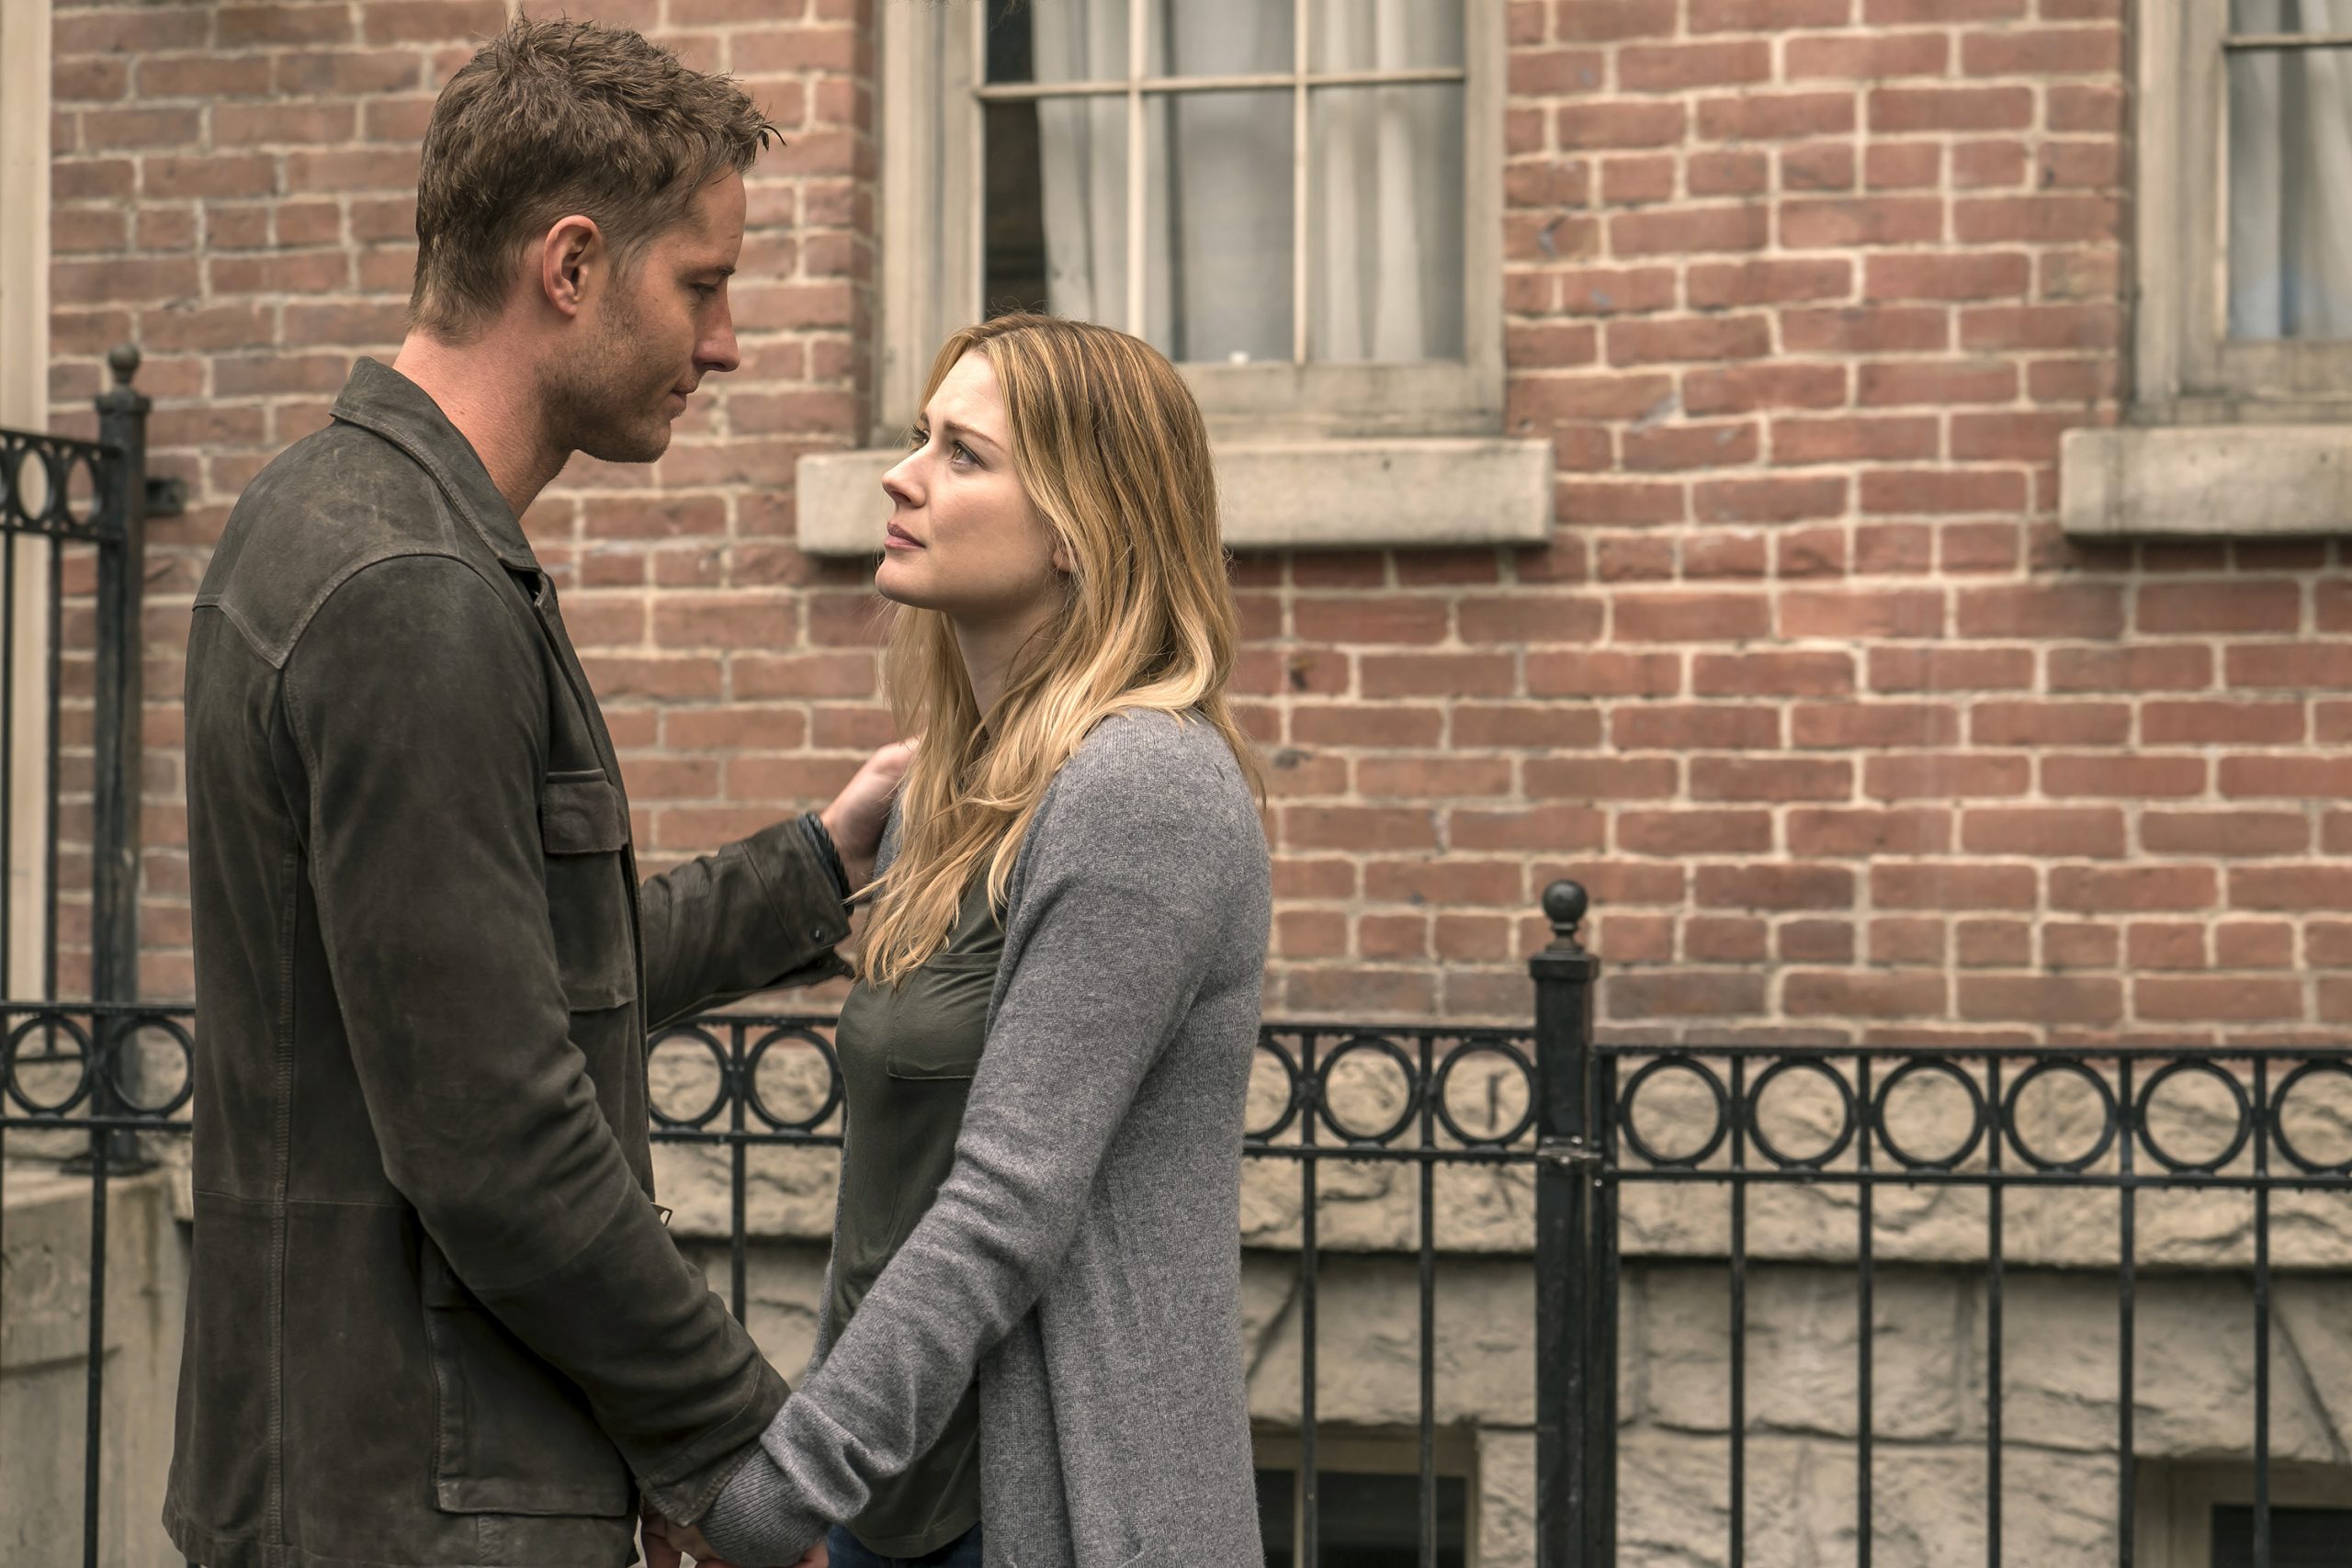 Justin Hartley and Alexandra Breckenridge, in character as Kevin and Sophie in 'This Is Us' Season 1, share a scene.